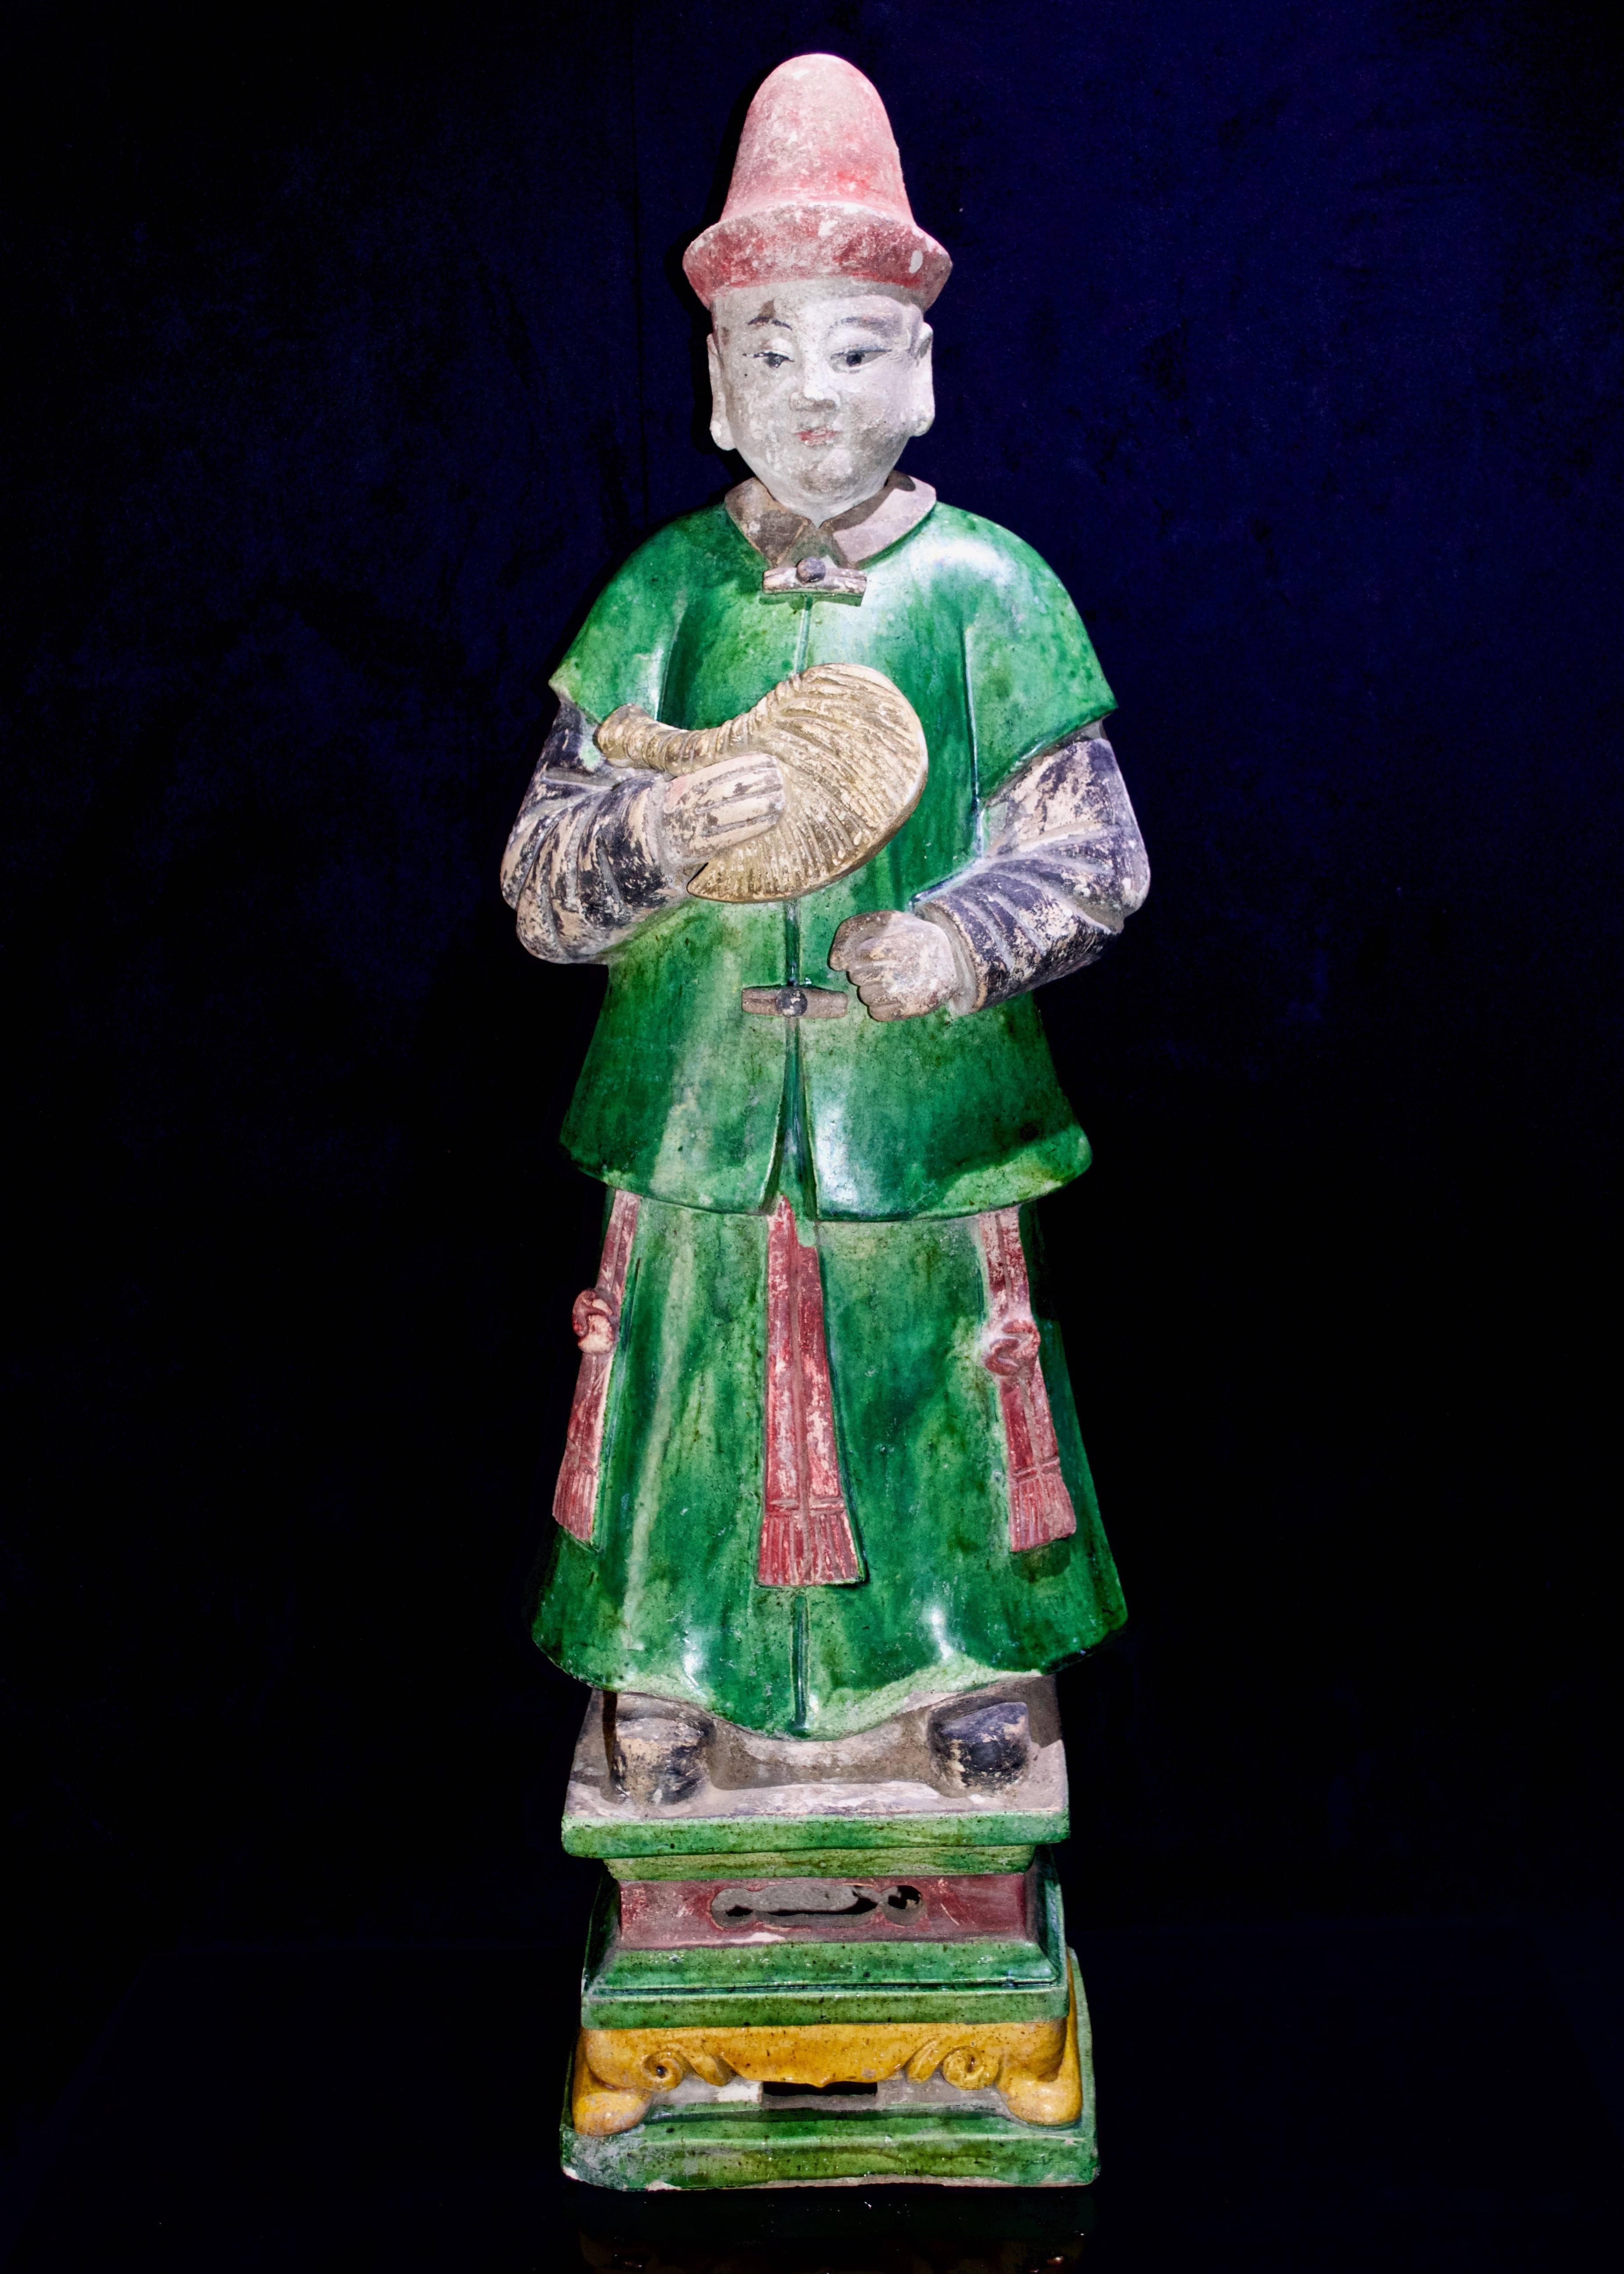 A magnificent pair of male and female courtiers from the Ming Dynasty (1368-1644 CE) in excellent condition. They are wearing traditional Daopao robes in green and black garments with red accents in an enamel finish. They are standing on a